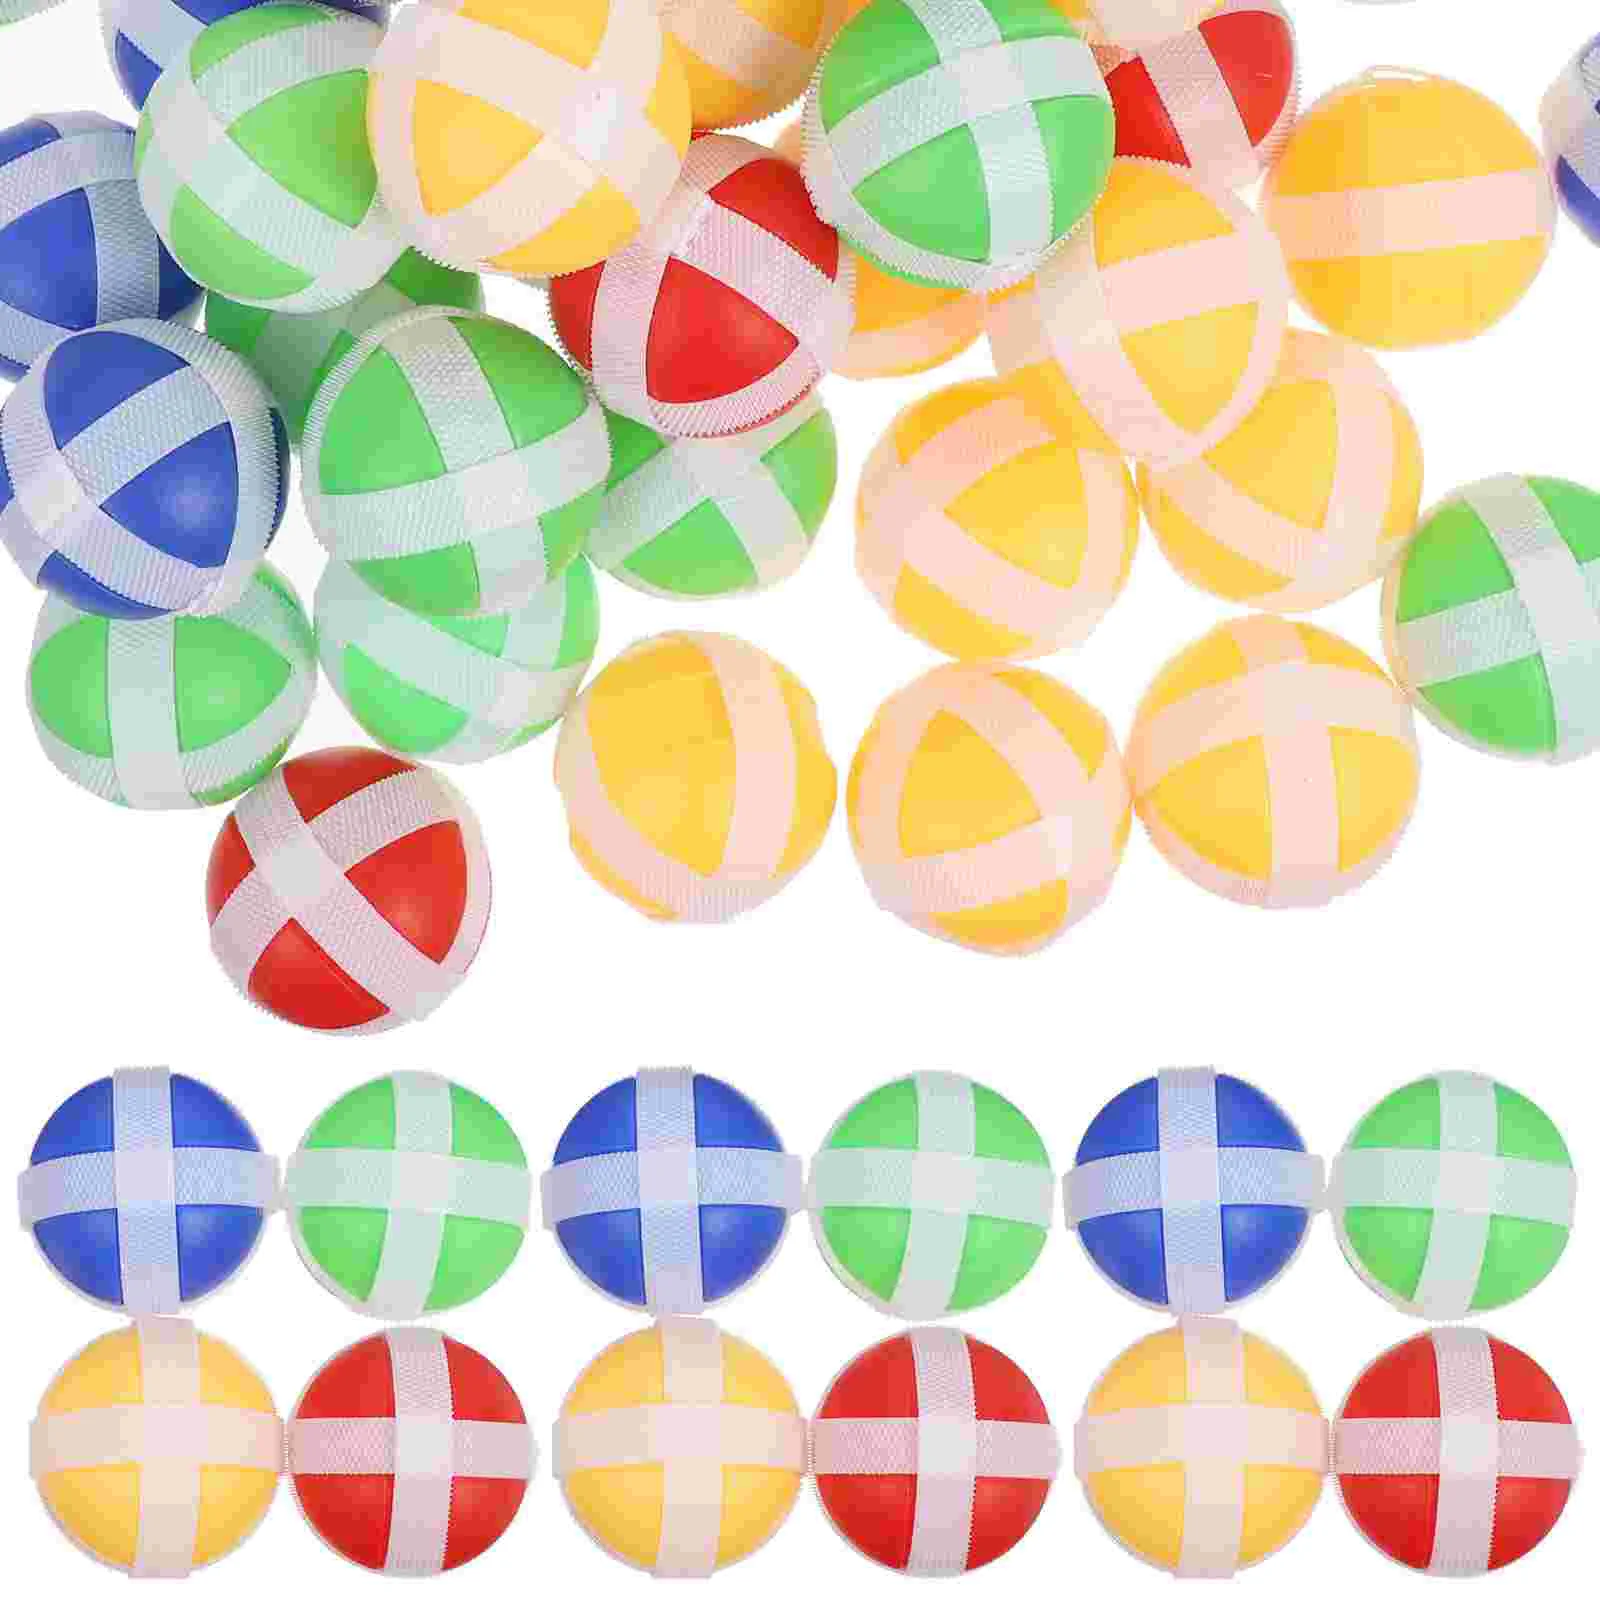 

Sticky Ball Balls Dartboard Game For Kids Throwingcatch Darts And Toss Wall Ceiling Party Games Loop Fabric Stick